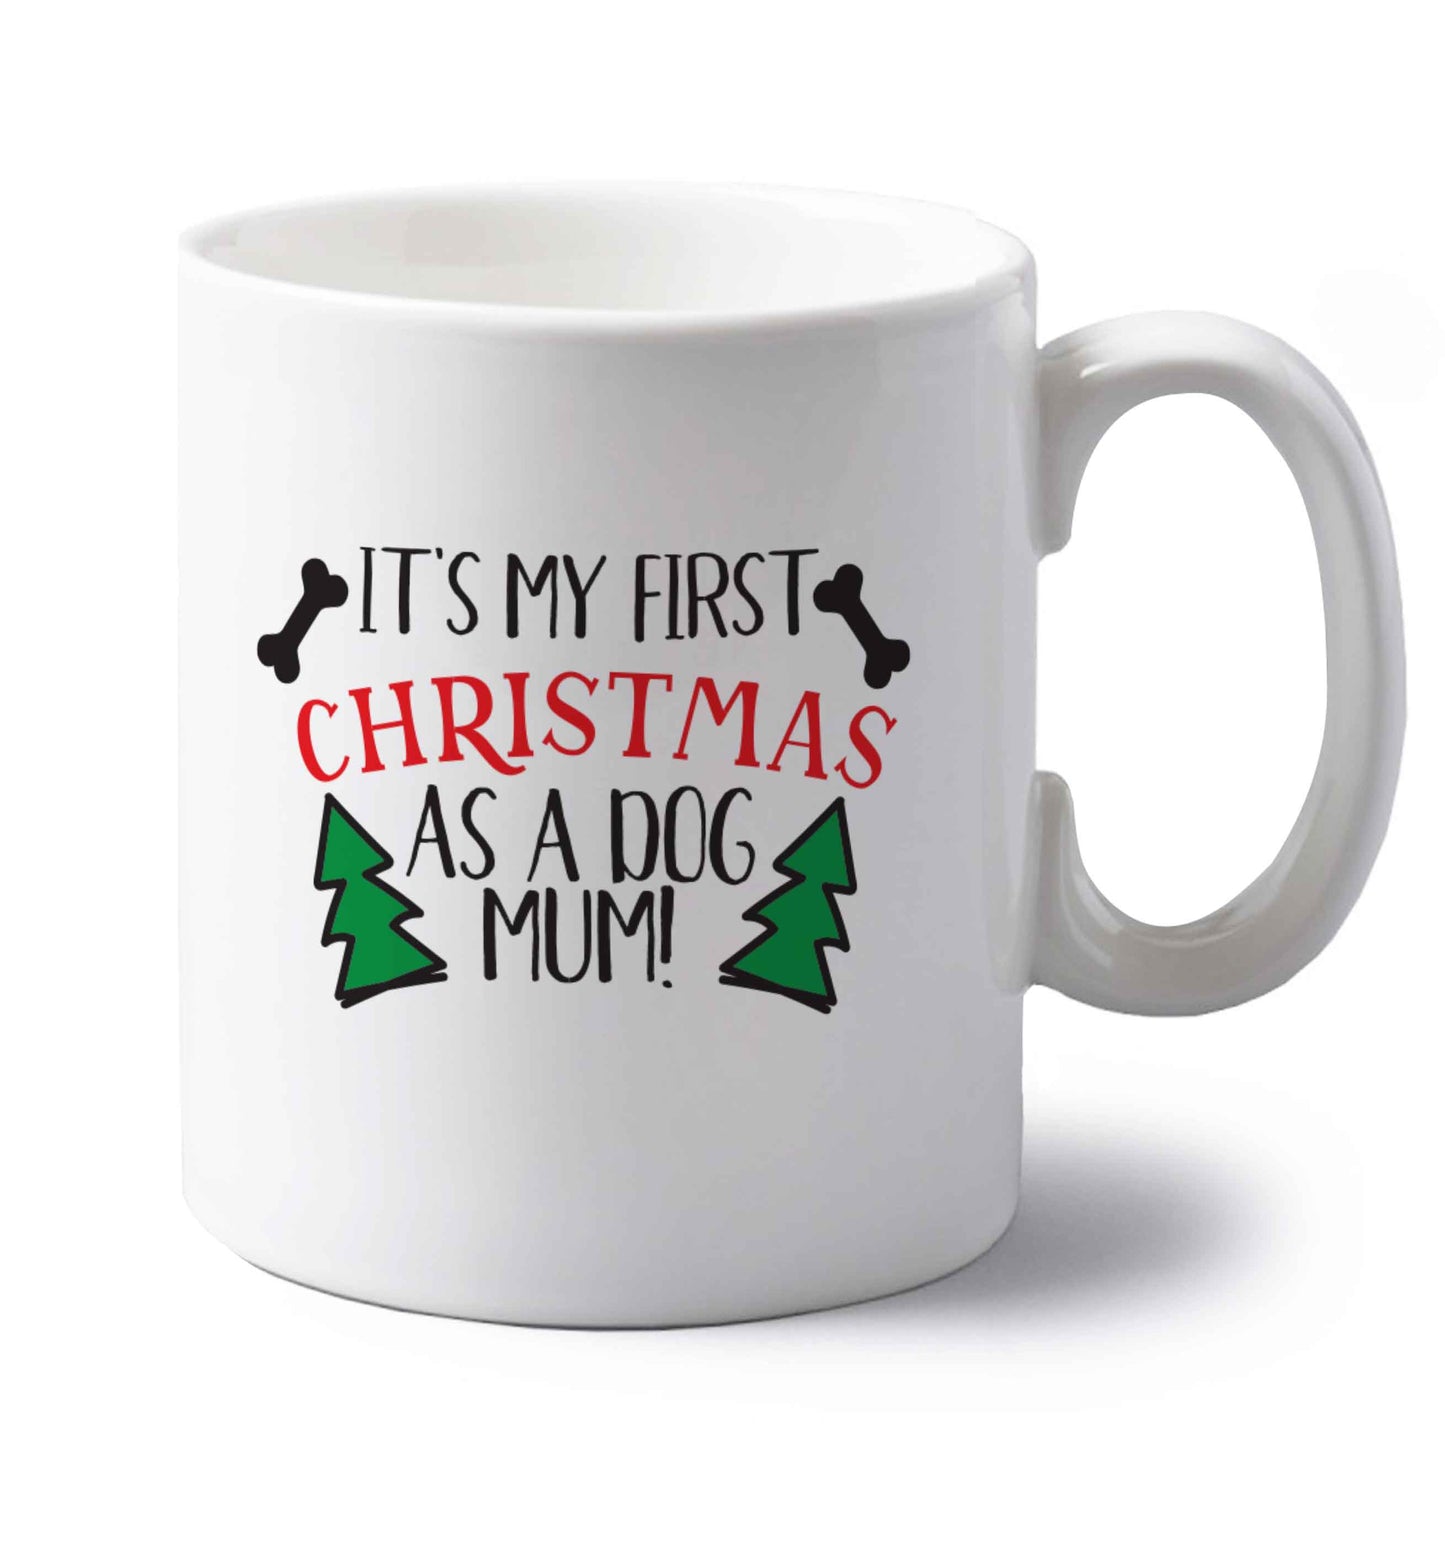 It's my first Christmas as a dog mum! left handed white ceramic mug 